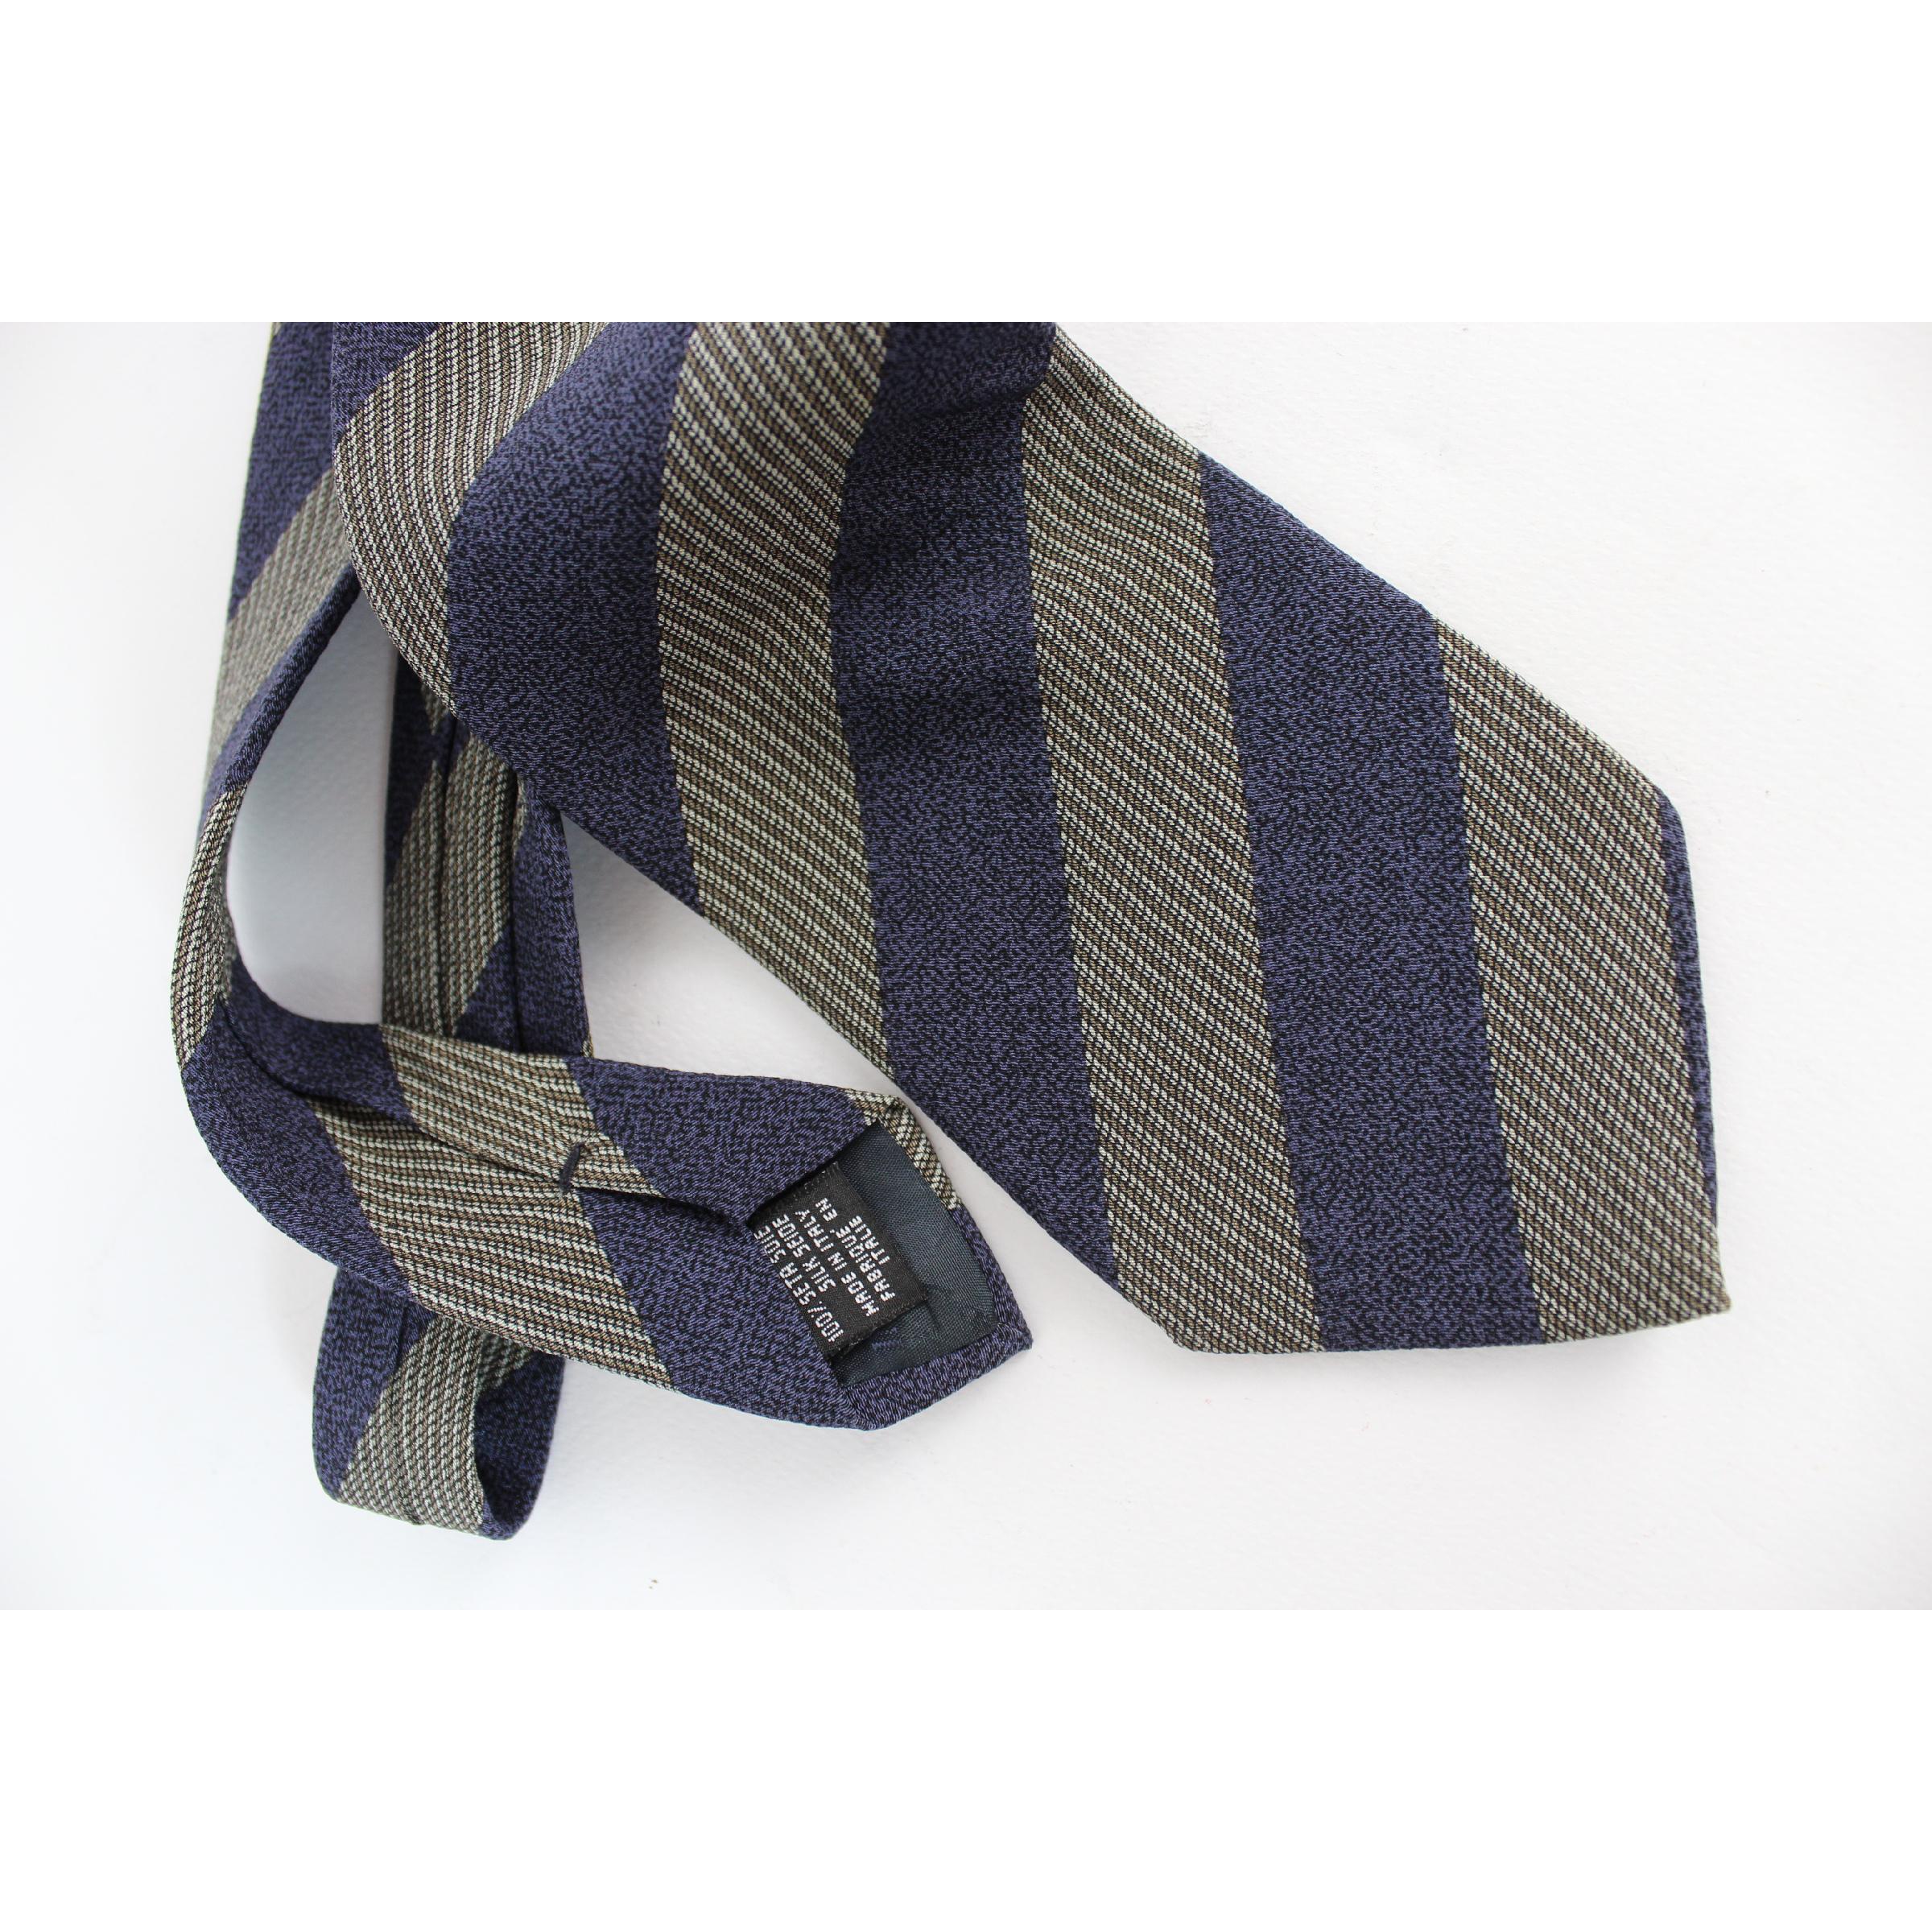 Vintage 90s tie Armani Collezioni. Classic model, 100% silk, striped blue and gray color. Made in Italy. Excellent condition.

Length: 150 cm
Width: 9.5 cm